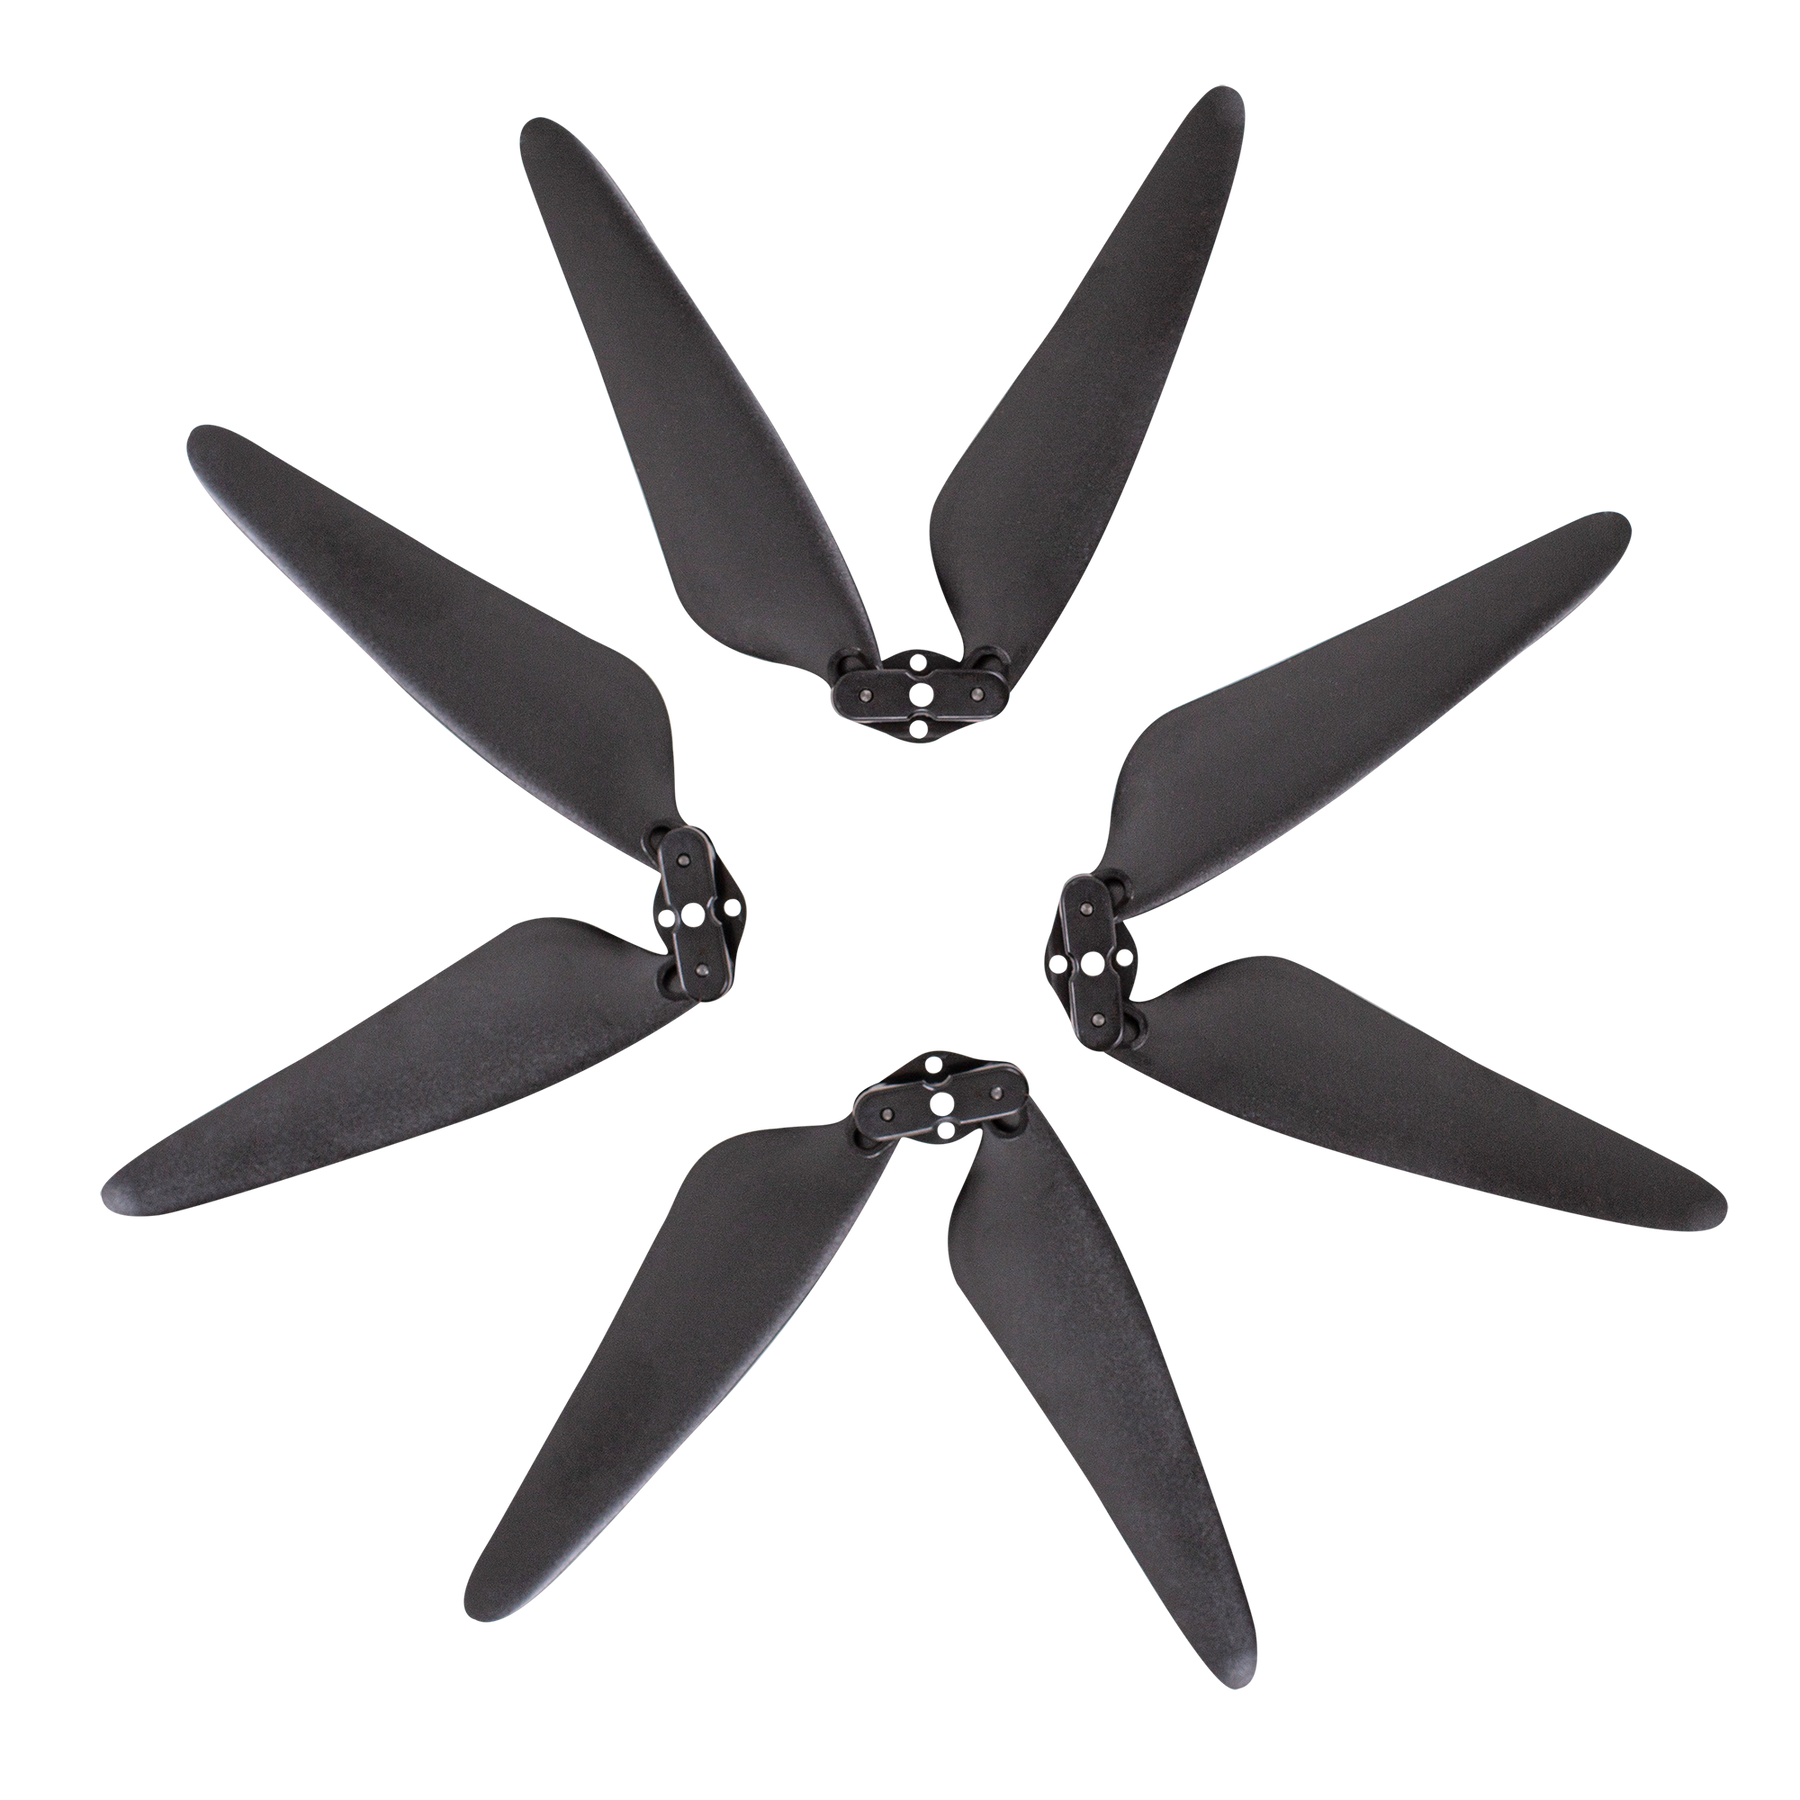 Replacement rotor blades for the QC-120 GPS drone